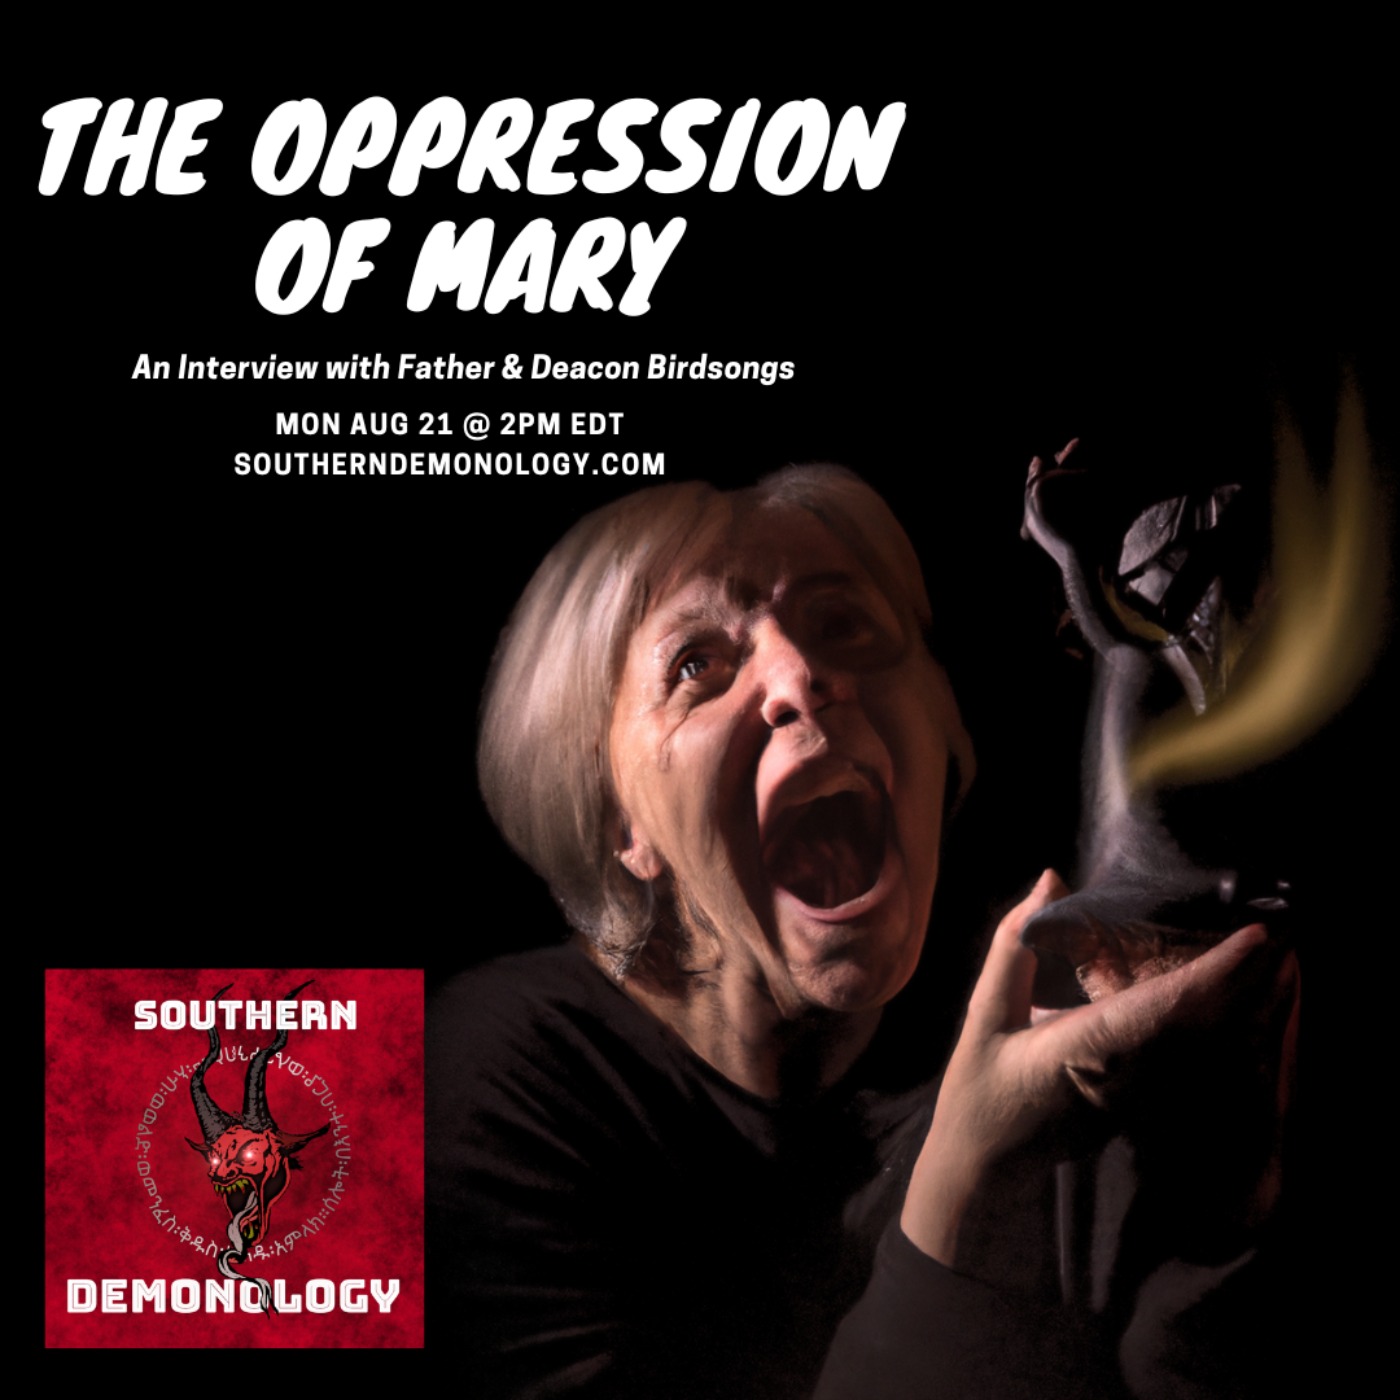 The Oppression of Mary